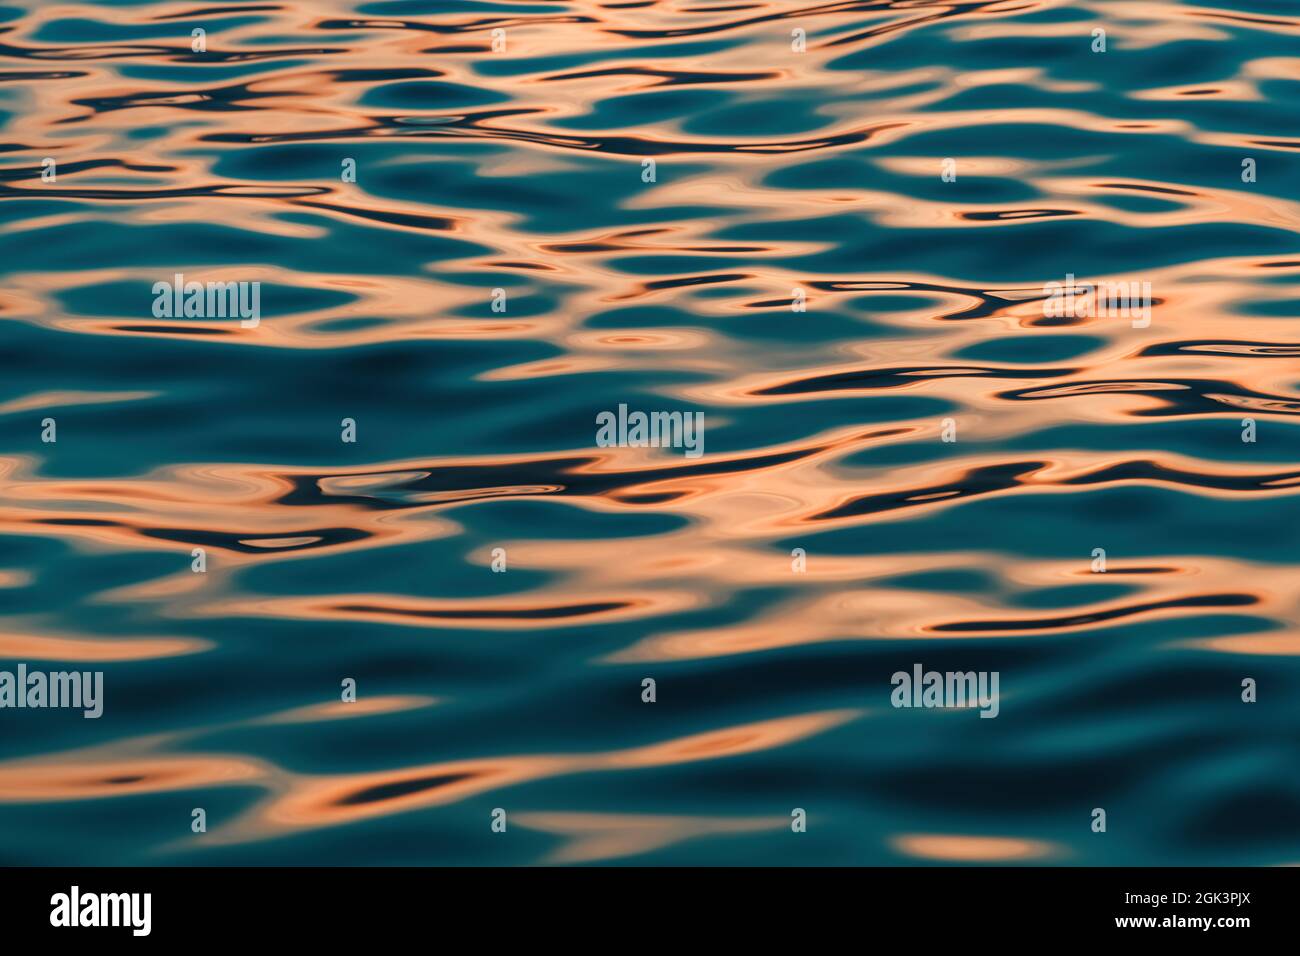 Rippled surface of blue sea water in sunset, orange and teal tones, selective focus Stock Photo